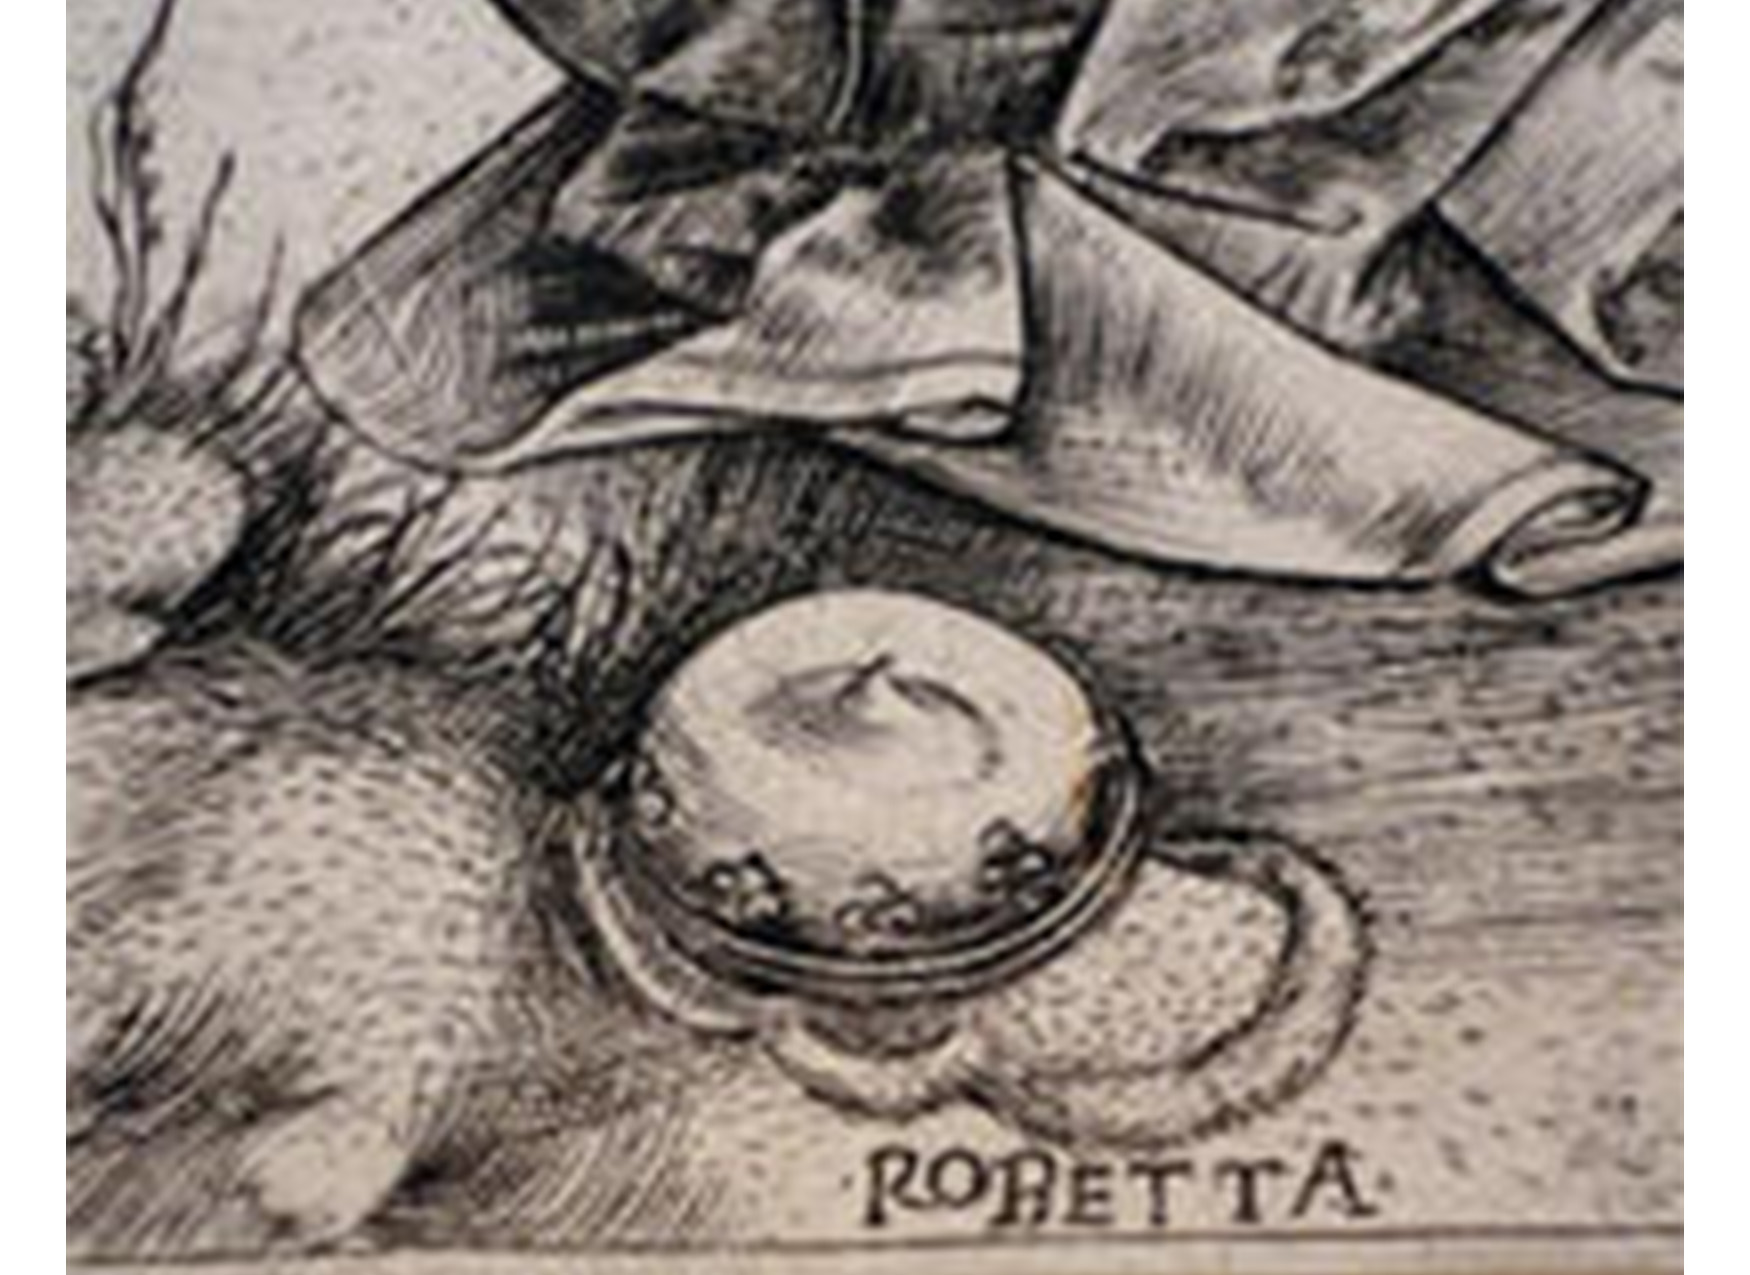 detail of hat sitting on the ground; text along bottom of the image reads "ROBETTA"